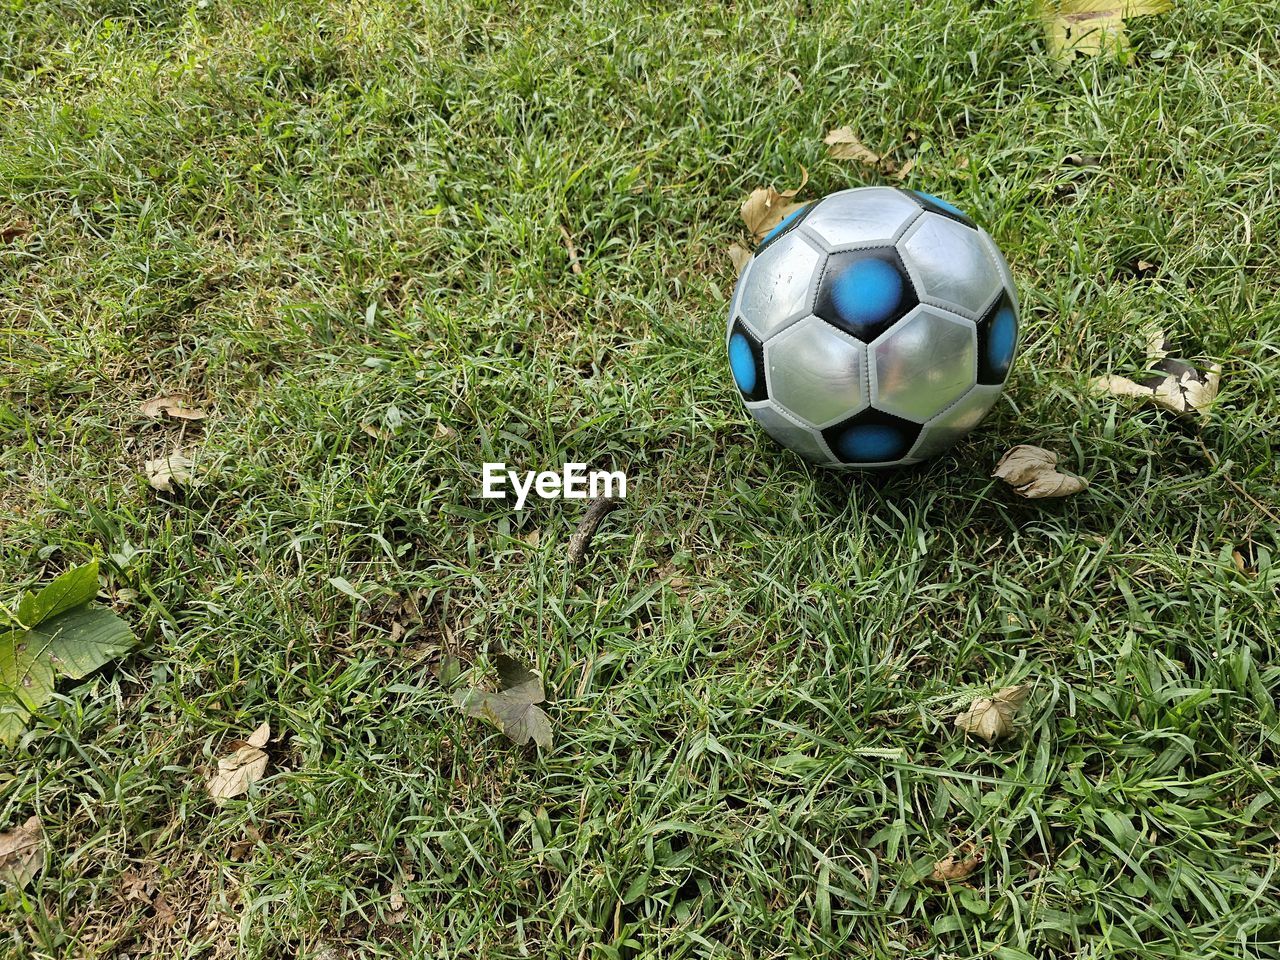 grass, soccer, soccer ball, team sport, sports equipment, sports, ball, plant, soccer field, green, high angle view, nature, field, lawn, land, soccer player, day, athlete, outdoors, playing field, soccer uniform, player, football